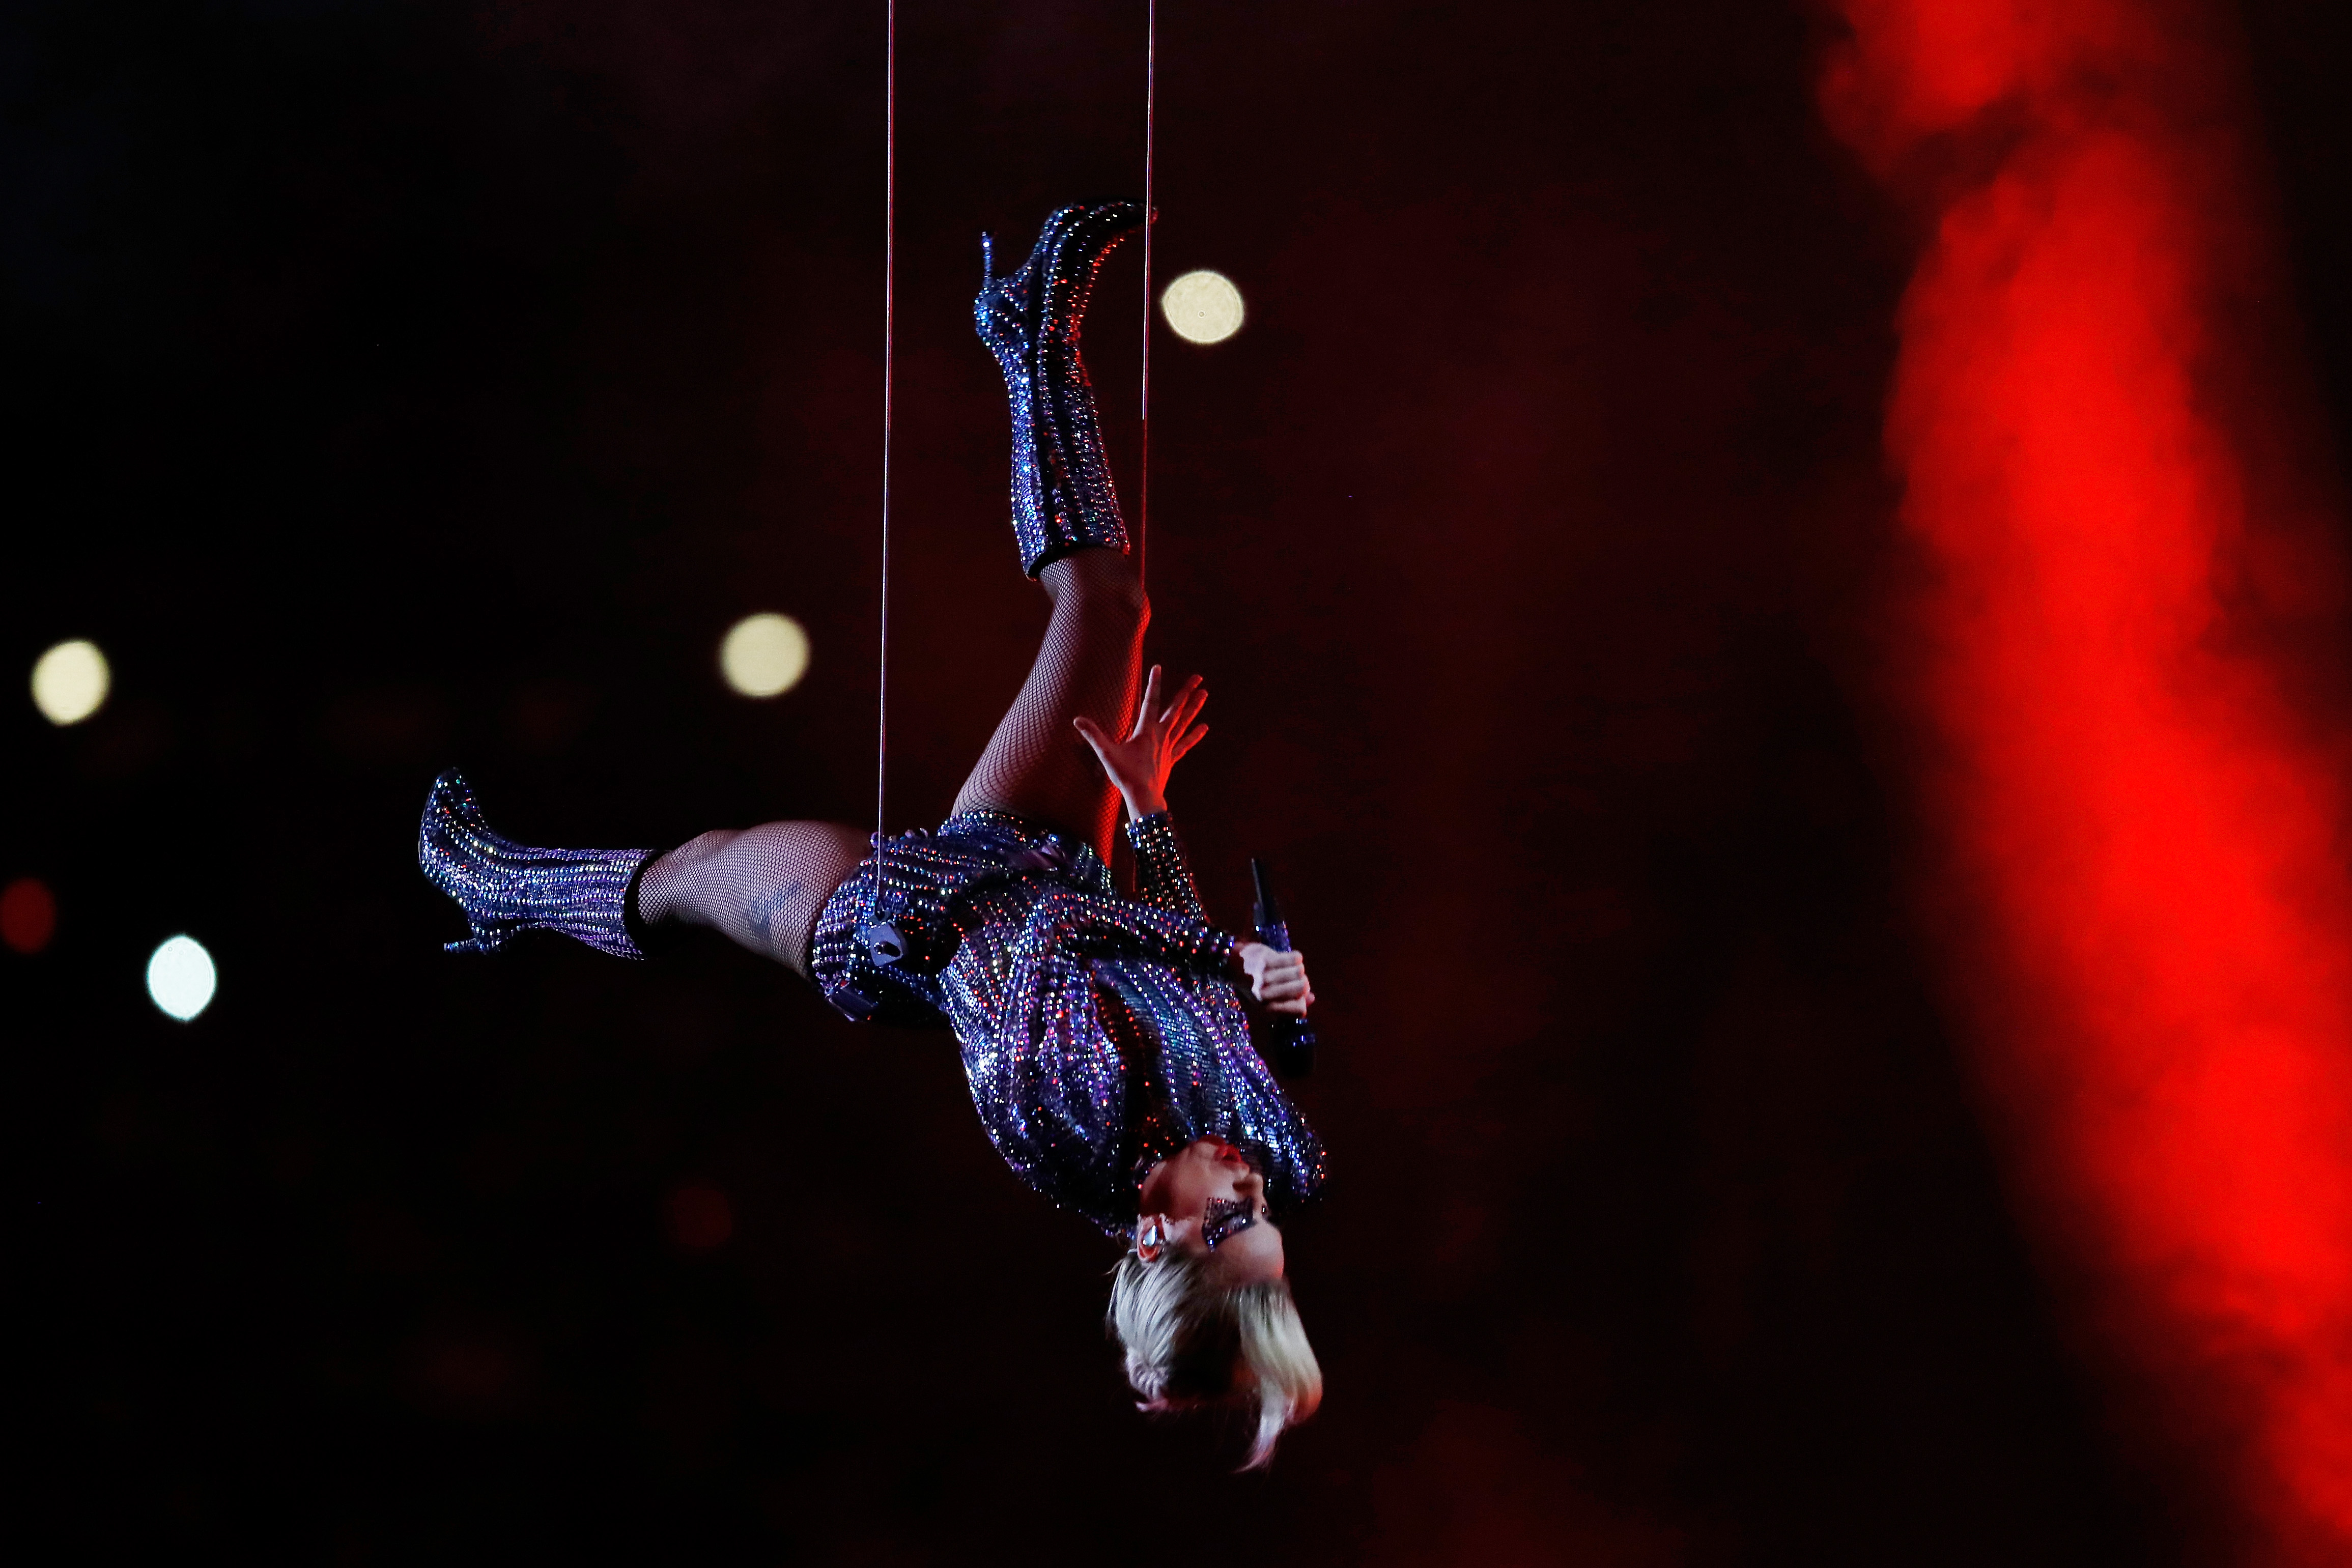 HOUSTON, TX - FEBRUARY 05: Lady Gaga performs during the Pepsi Zero Sugar Super Bowl 51 Halftime Show at NRG Stadium on February 5, 2017 in Houston, Texas. (Photo by Gregory Shamus/Getty Images)